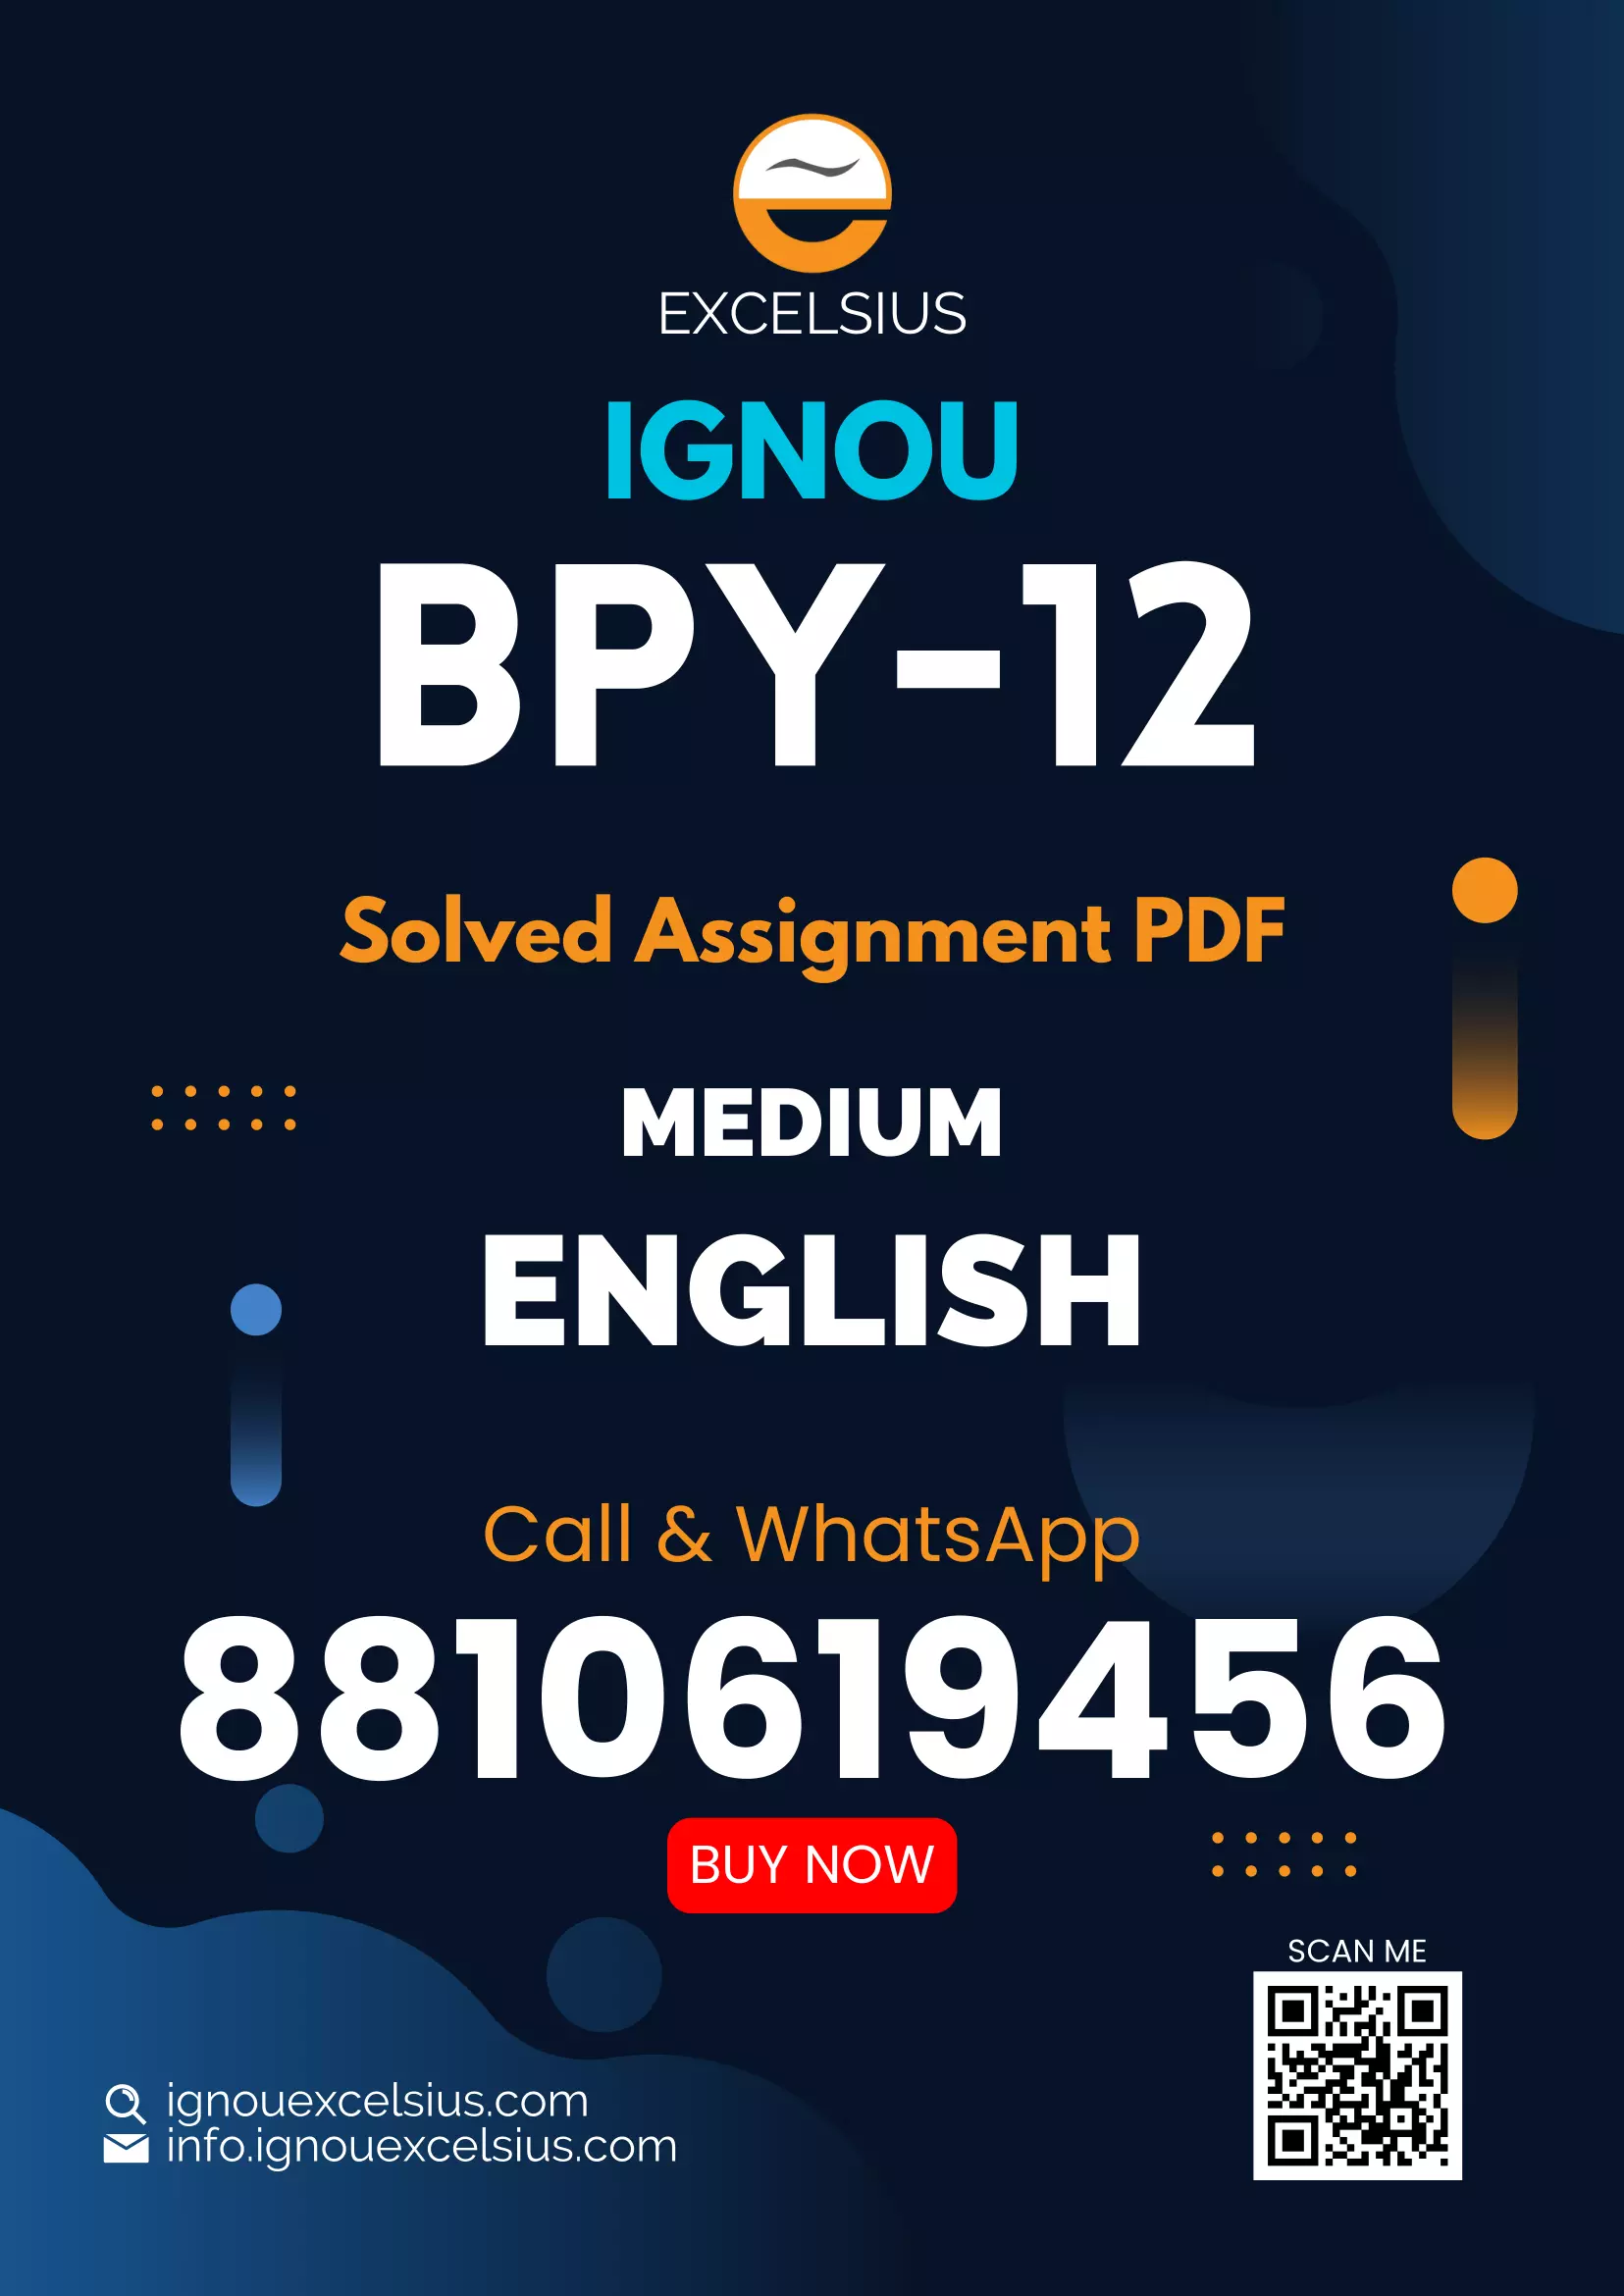 IGNOU BPY-12 - Philosophy of Science and Cosmology, Latest Solved Assignment-December 2022 - June 2023